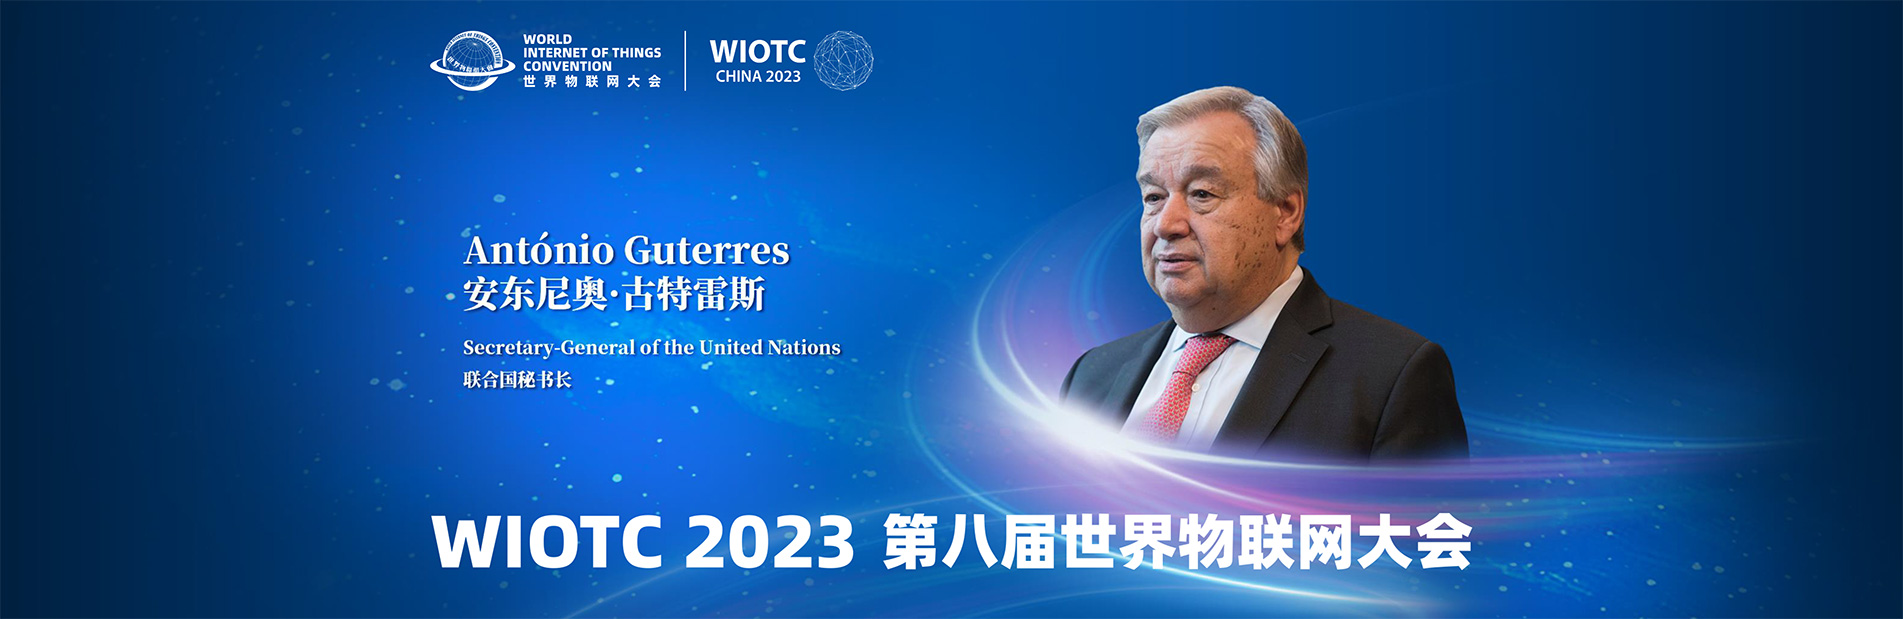 UN Secretary-General's message to the World Internet of Things Convention 2023